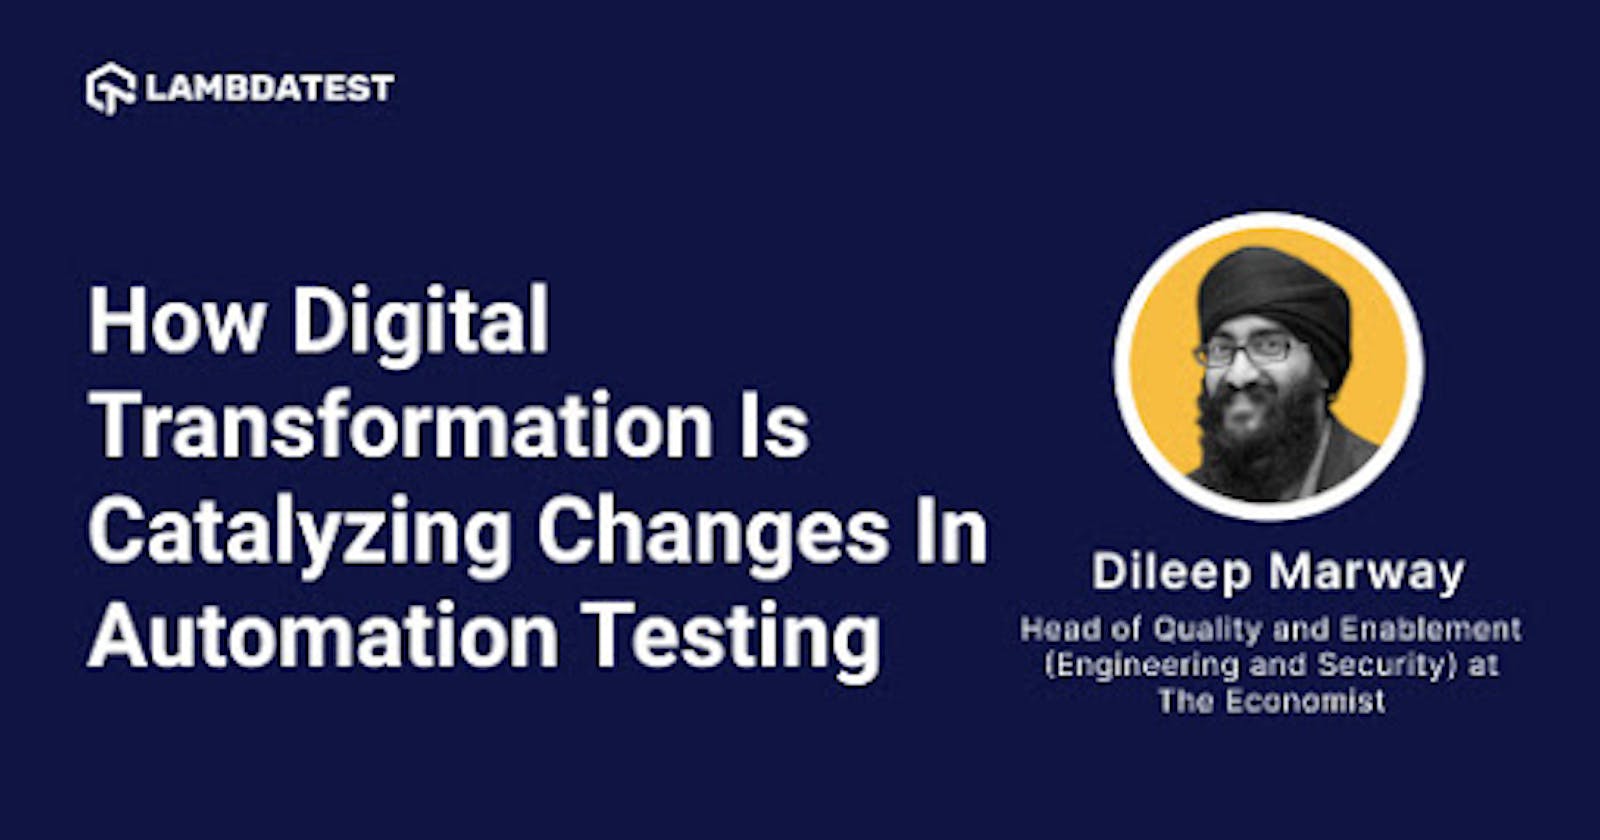 How Digital Transformation Is Catalyzing Changes In Automation Testing